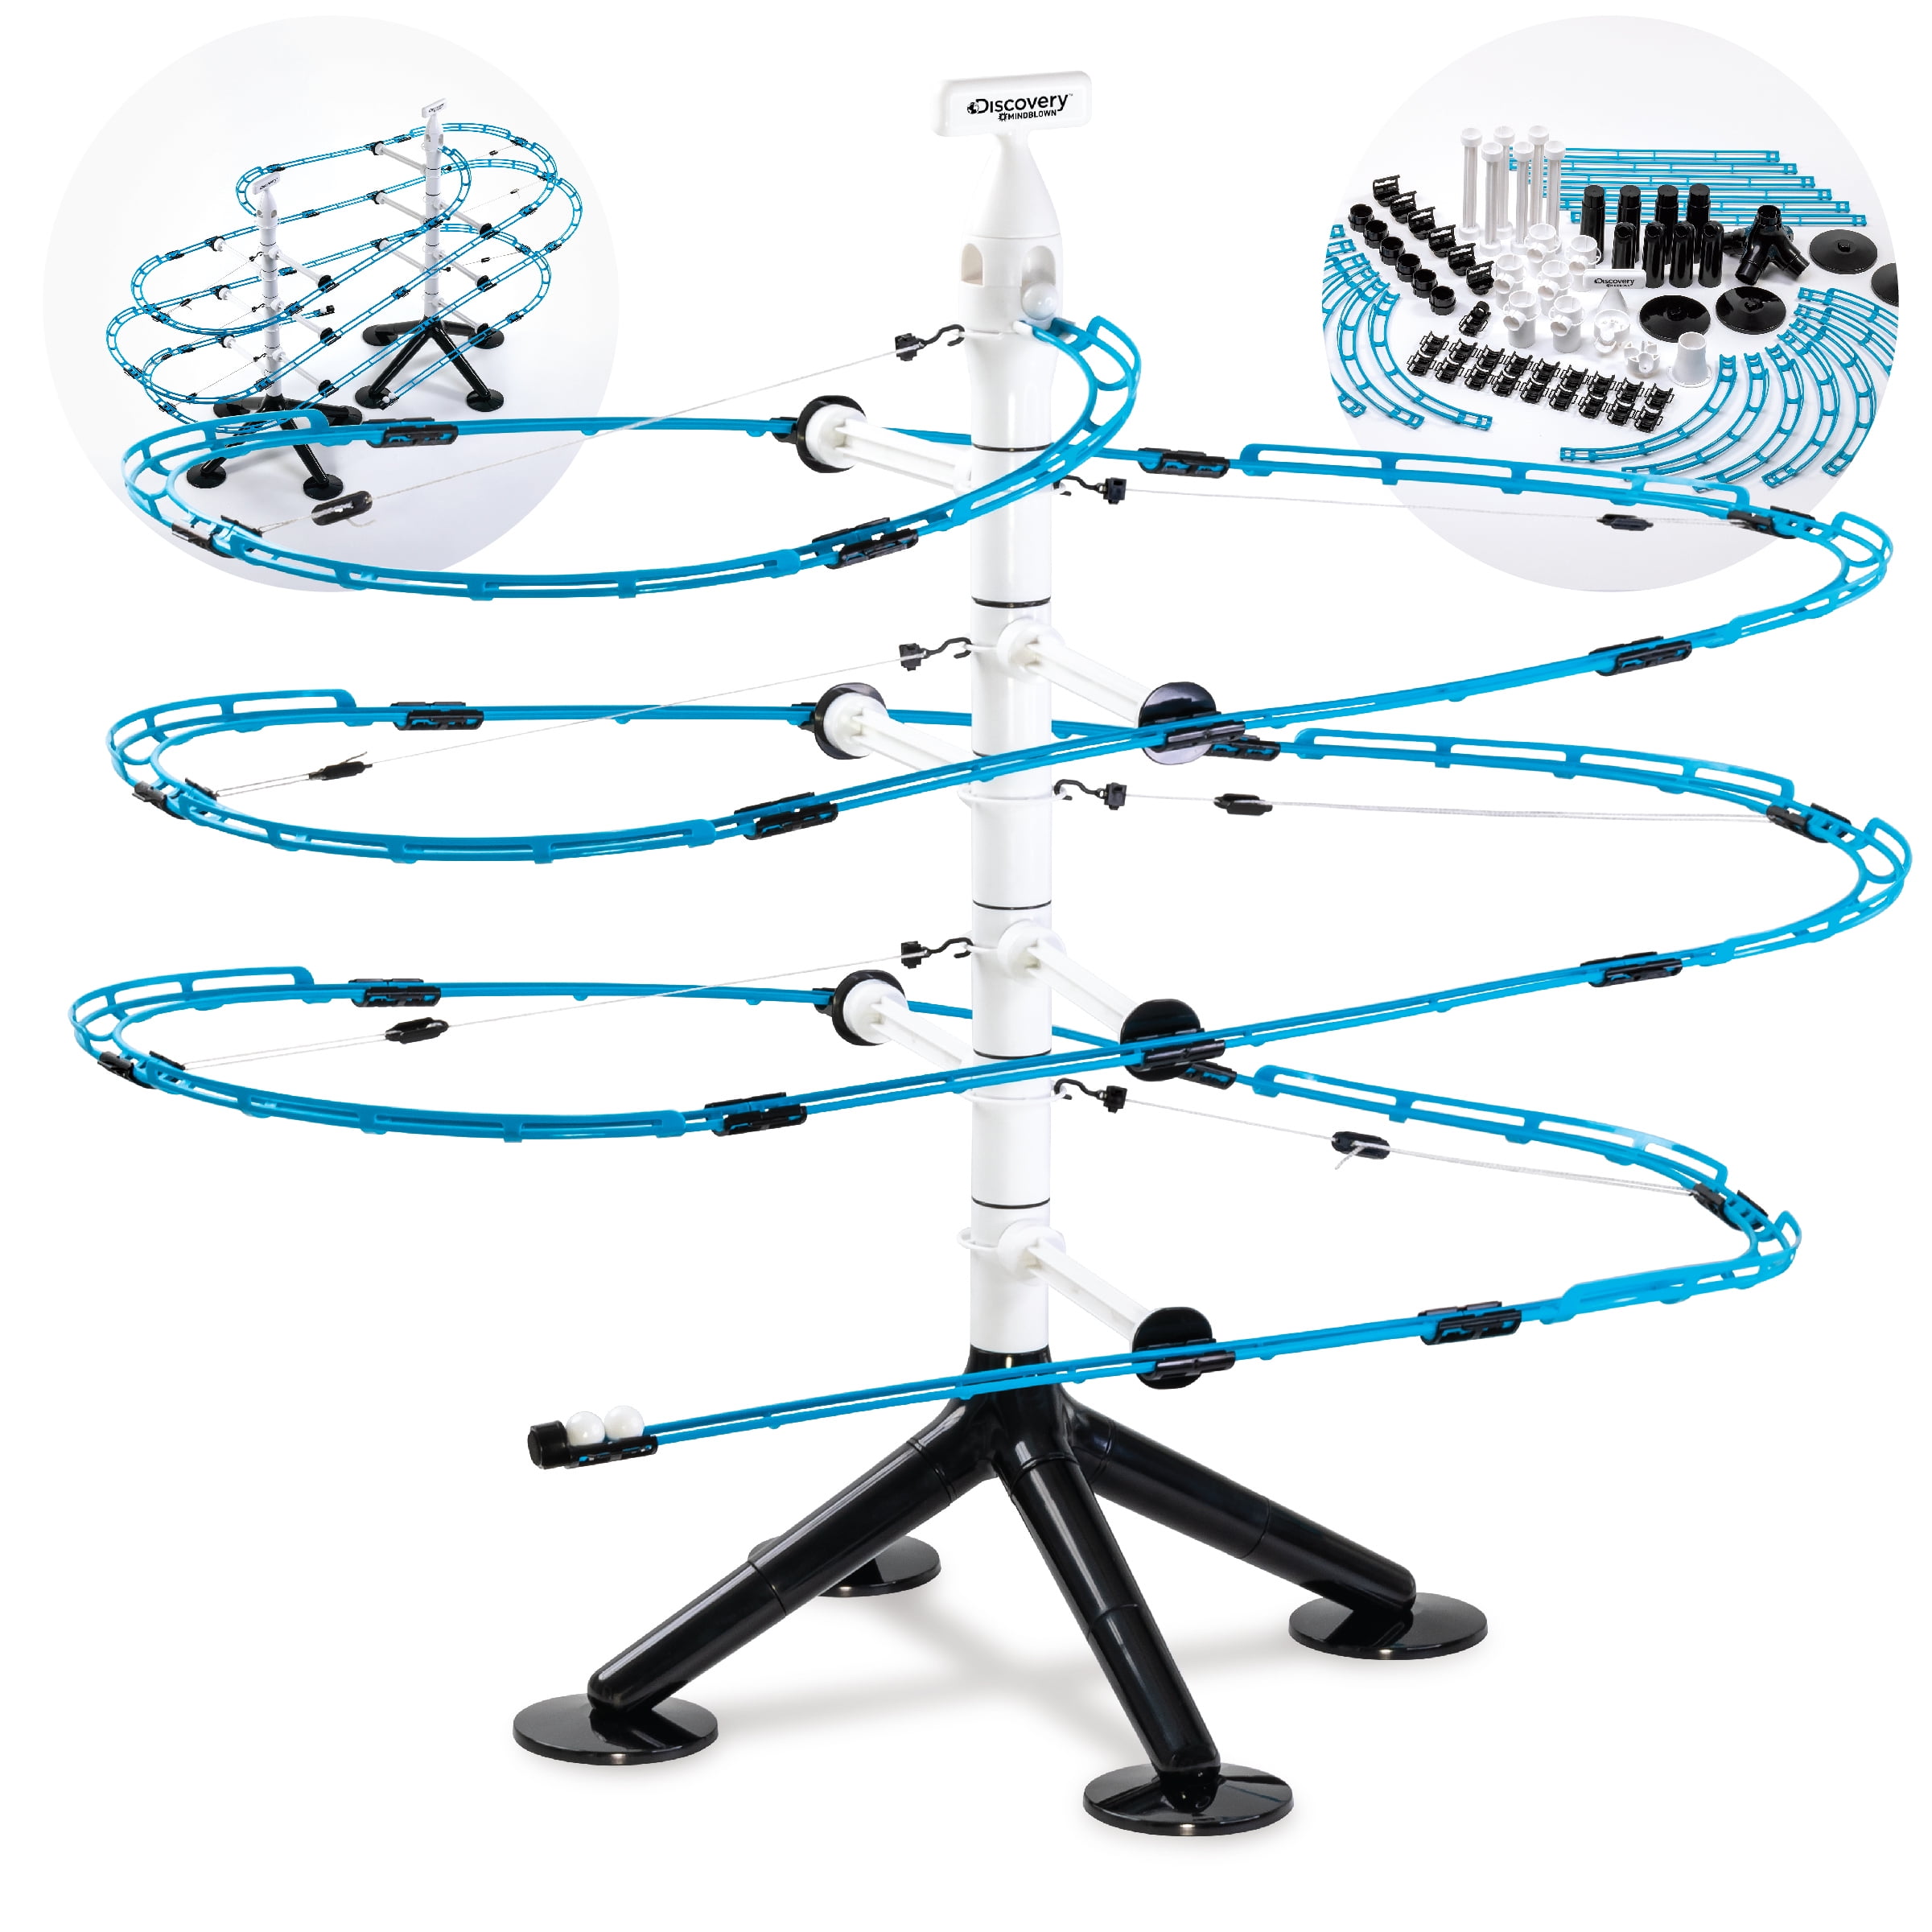 DISCOVERY SUSPENSION MARBLE RUN 